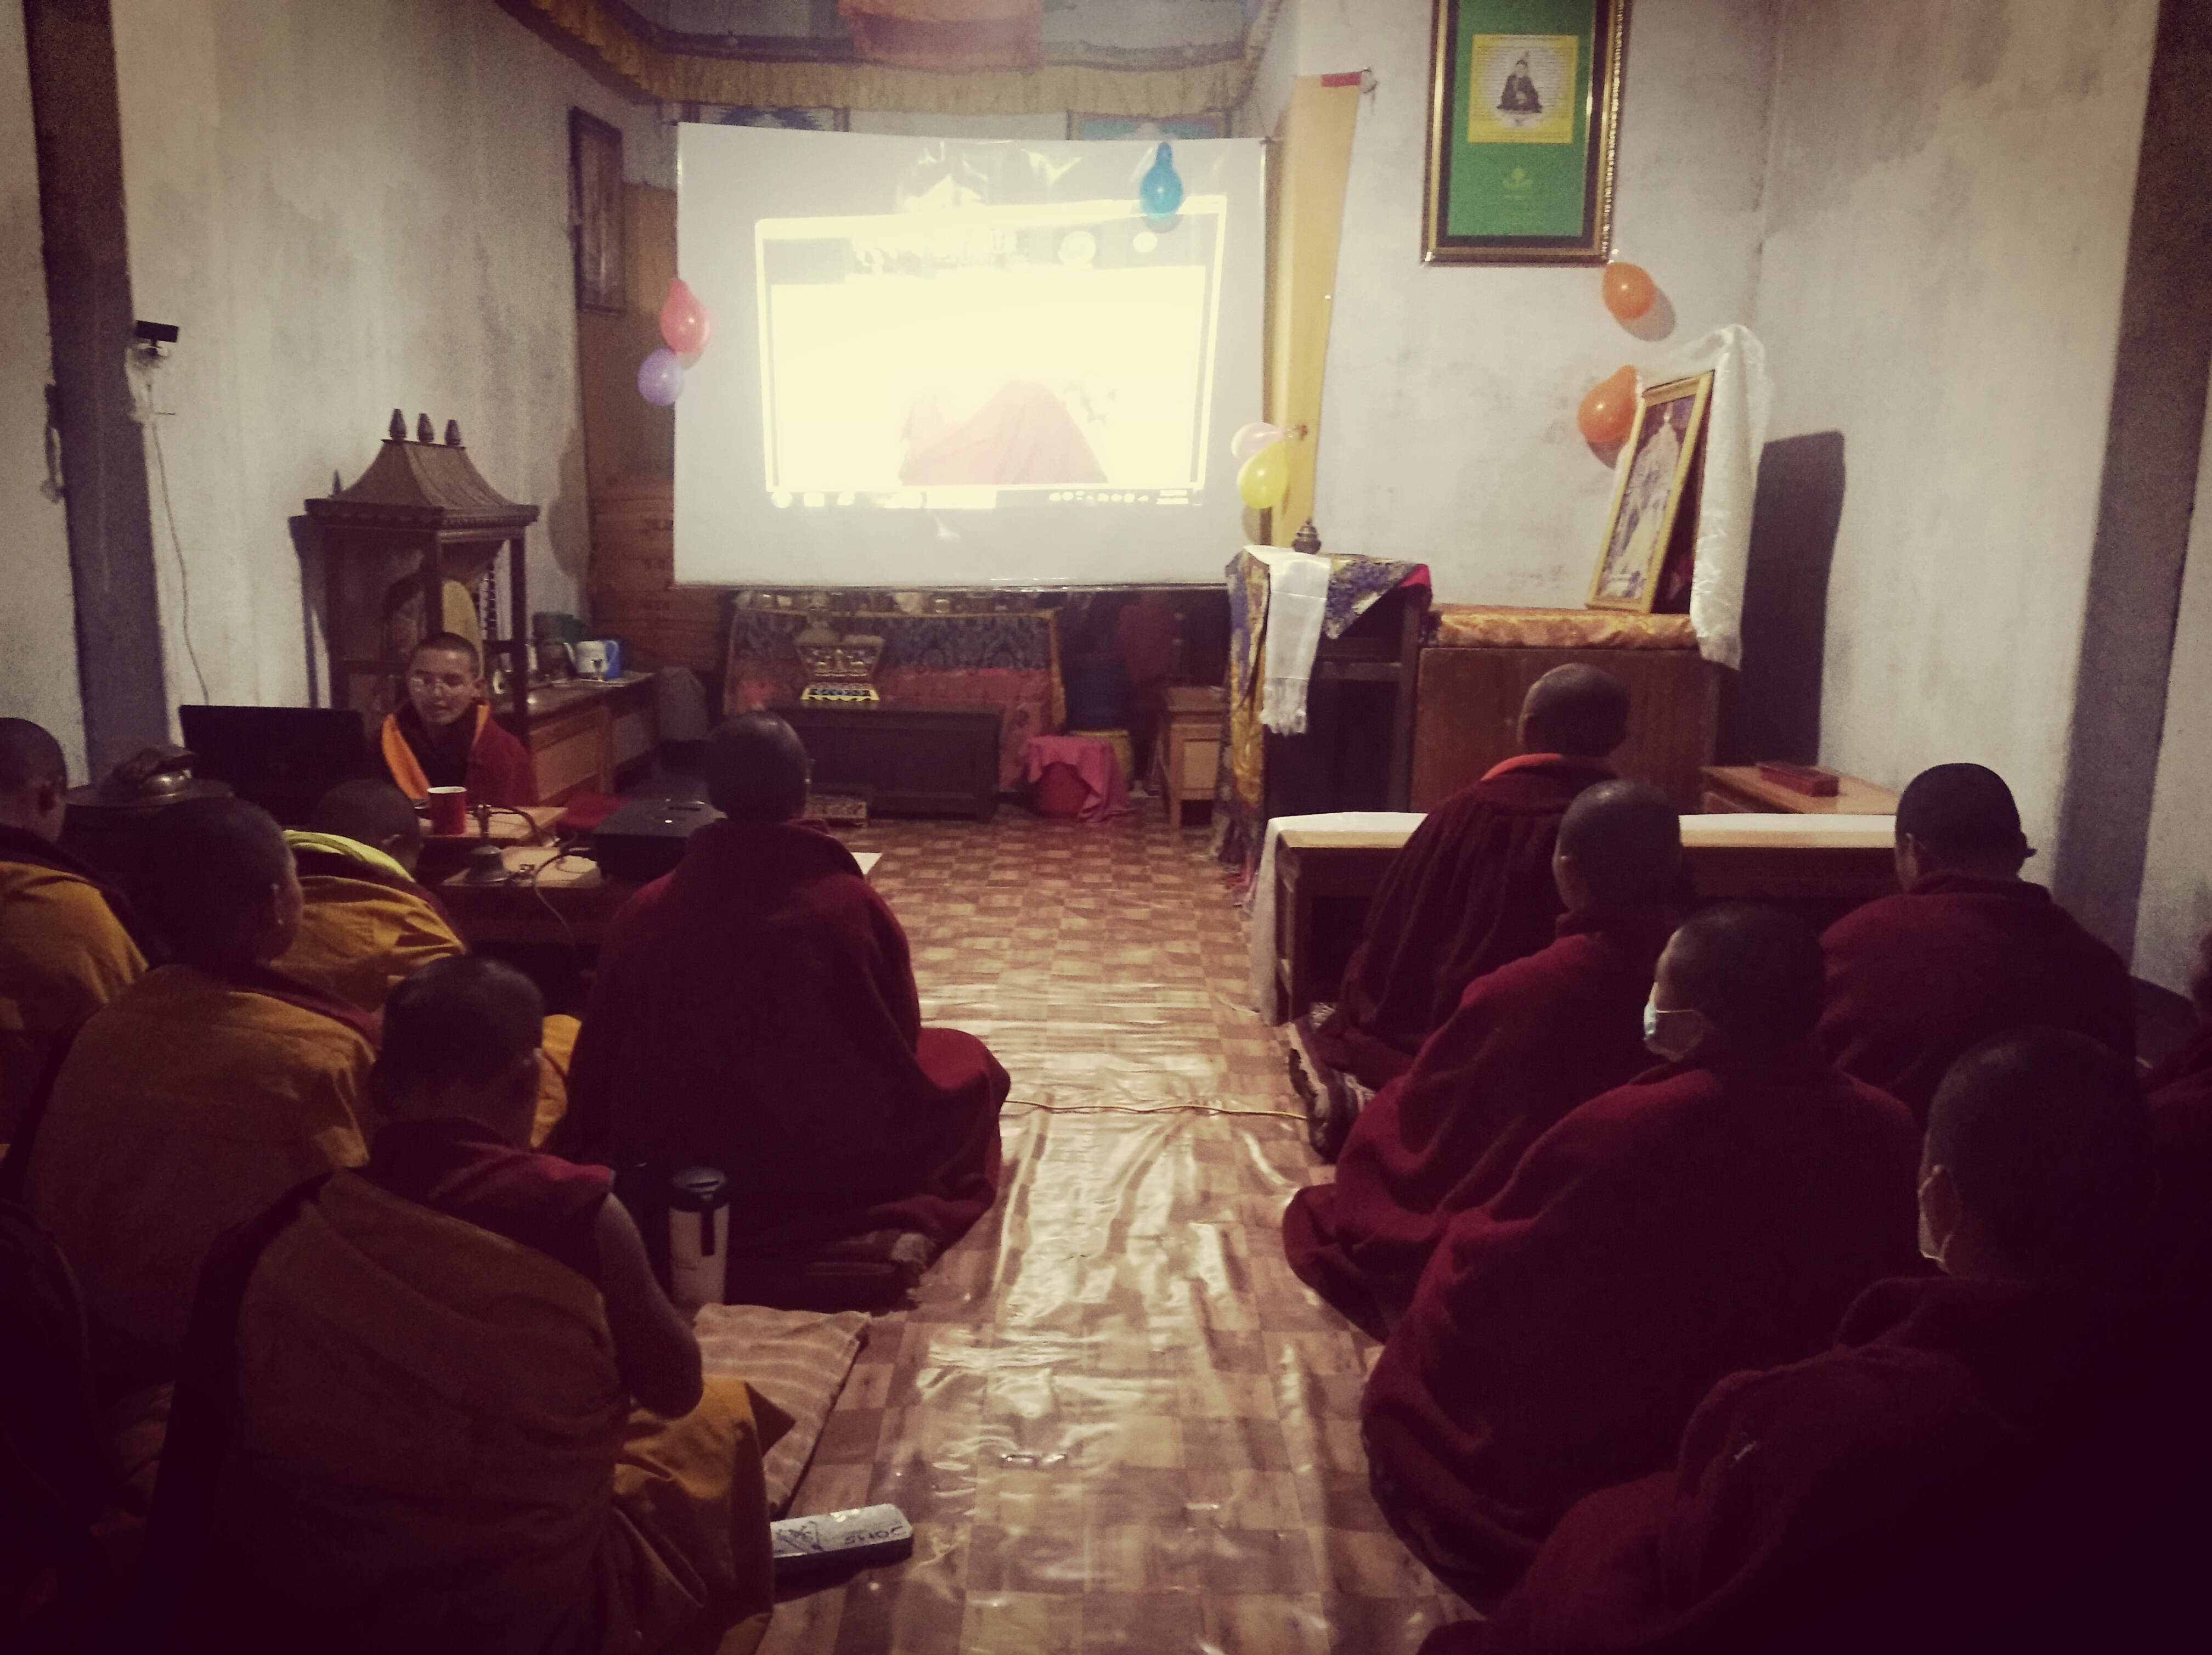 Day 6: Ascertaining the True Dharma and Favorable Conditions for Following Authentic Gurus